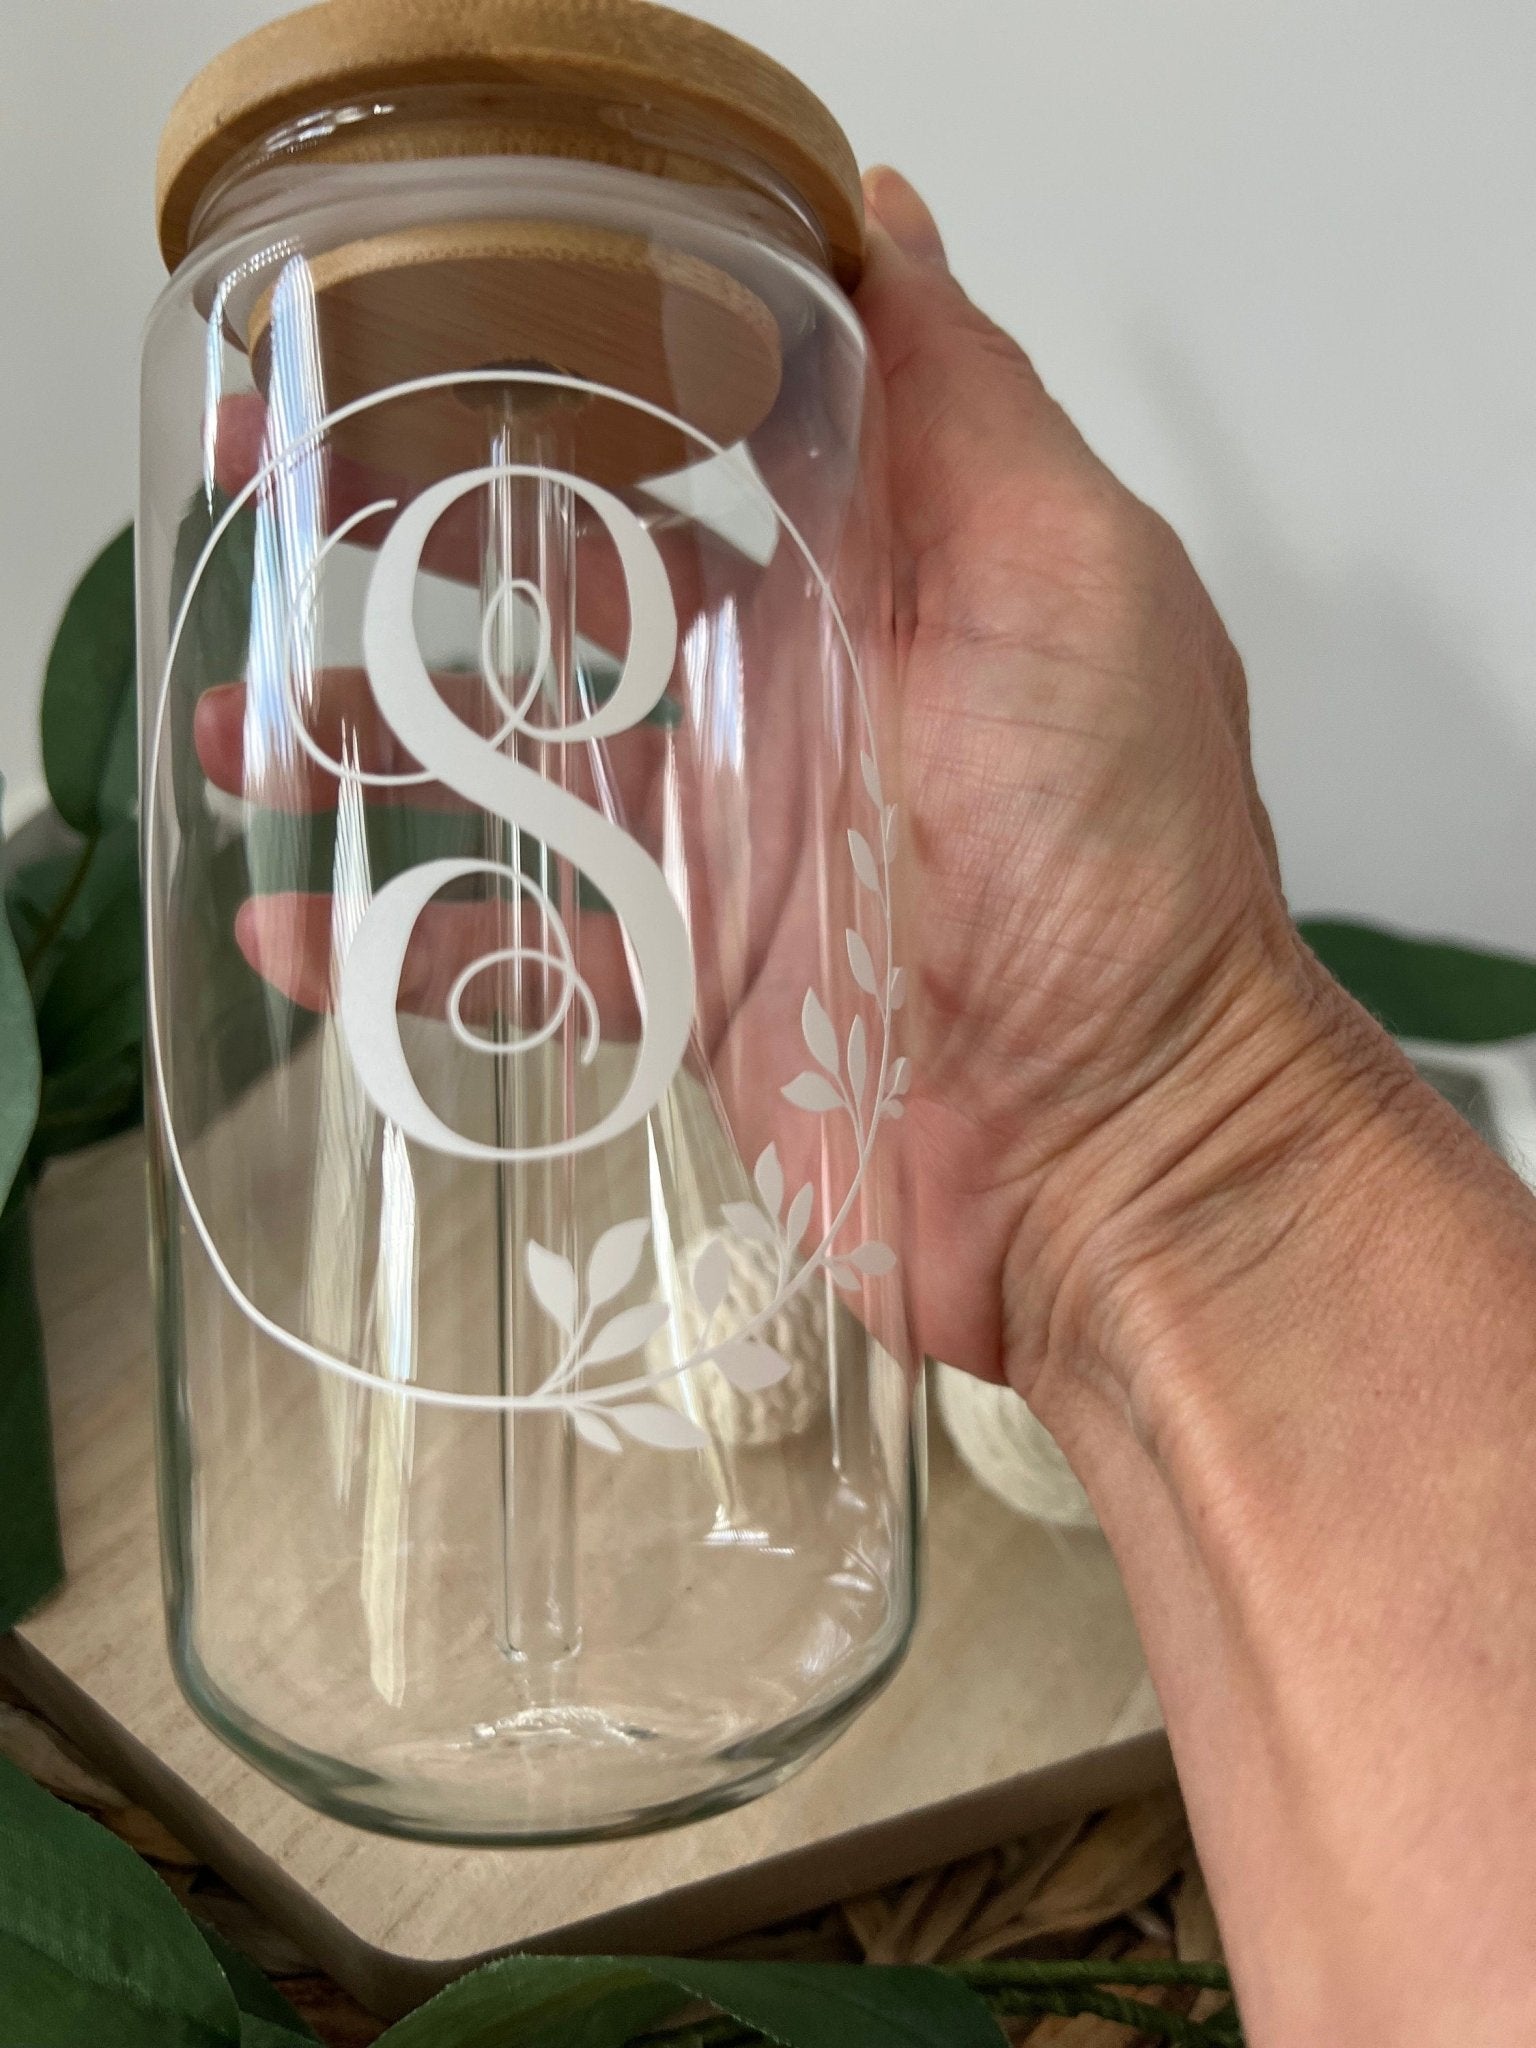 16 Oz Personalized Glass Cup With Bamboo Lid and Straw 